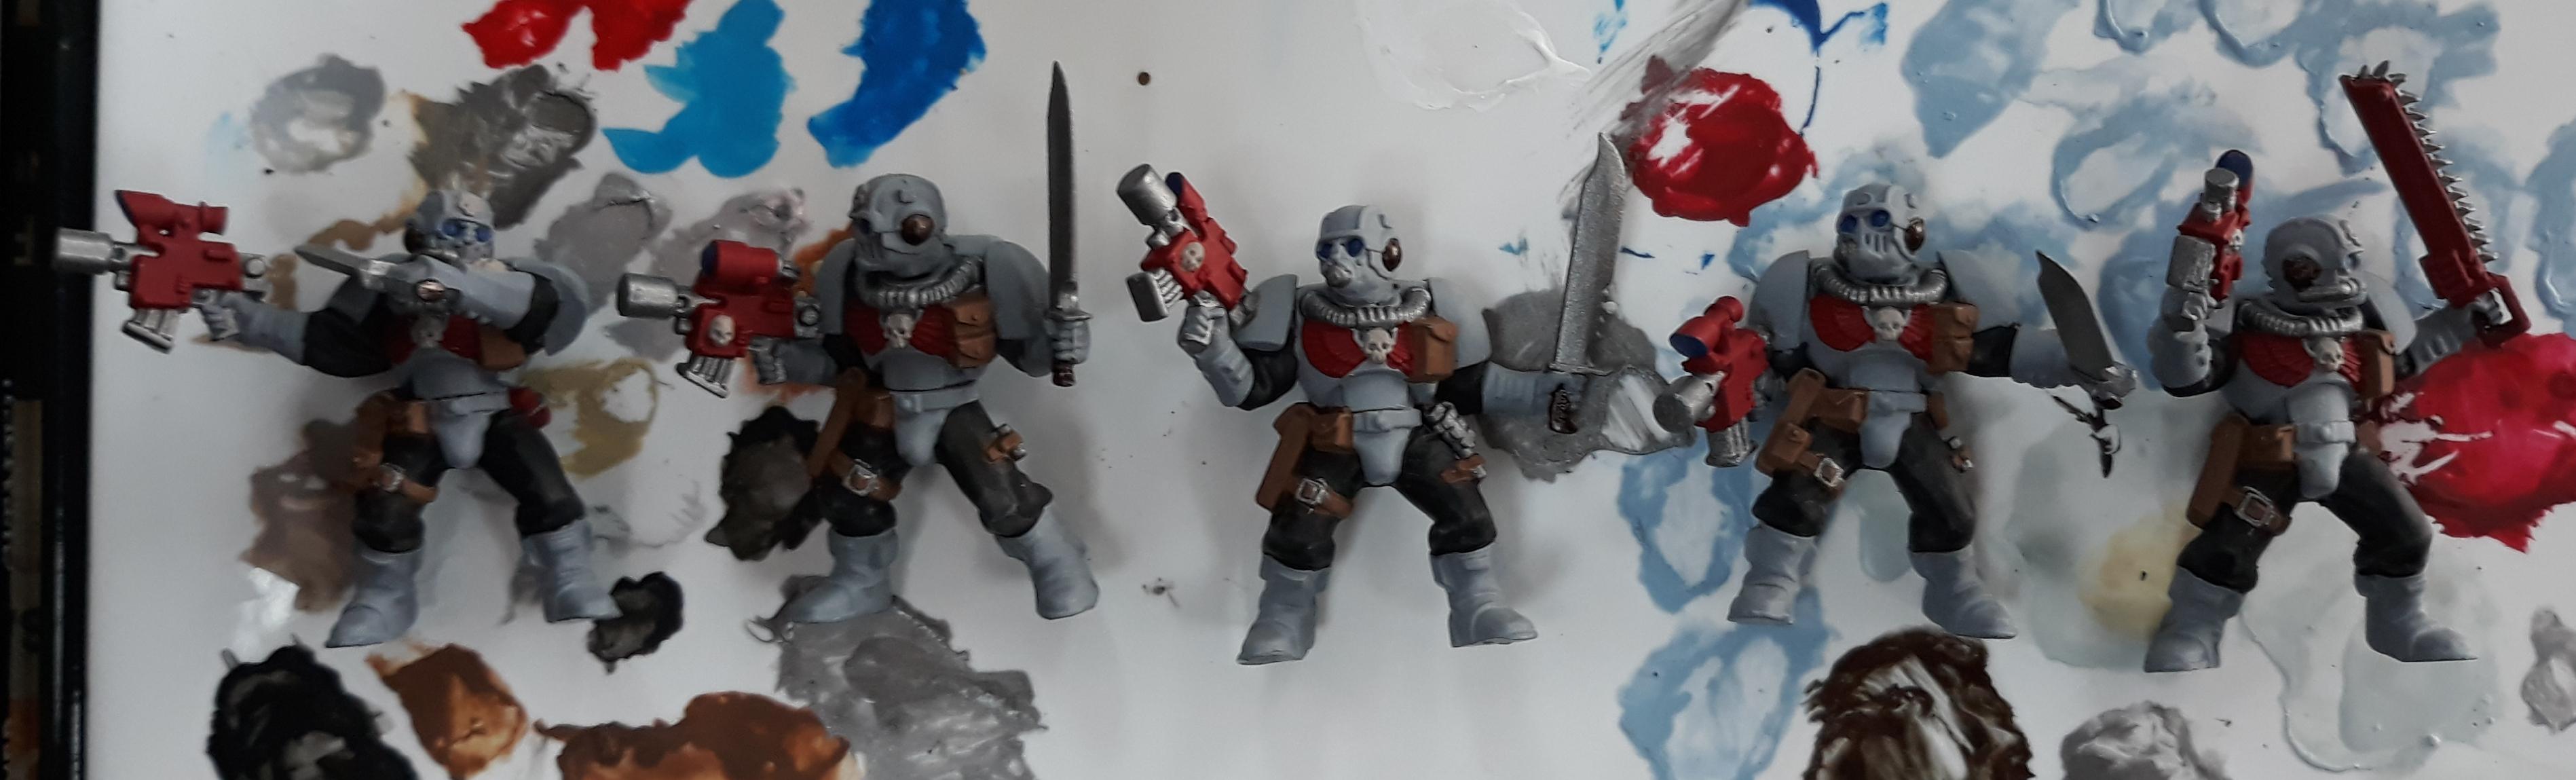 Scouts WIP 3